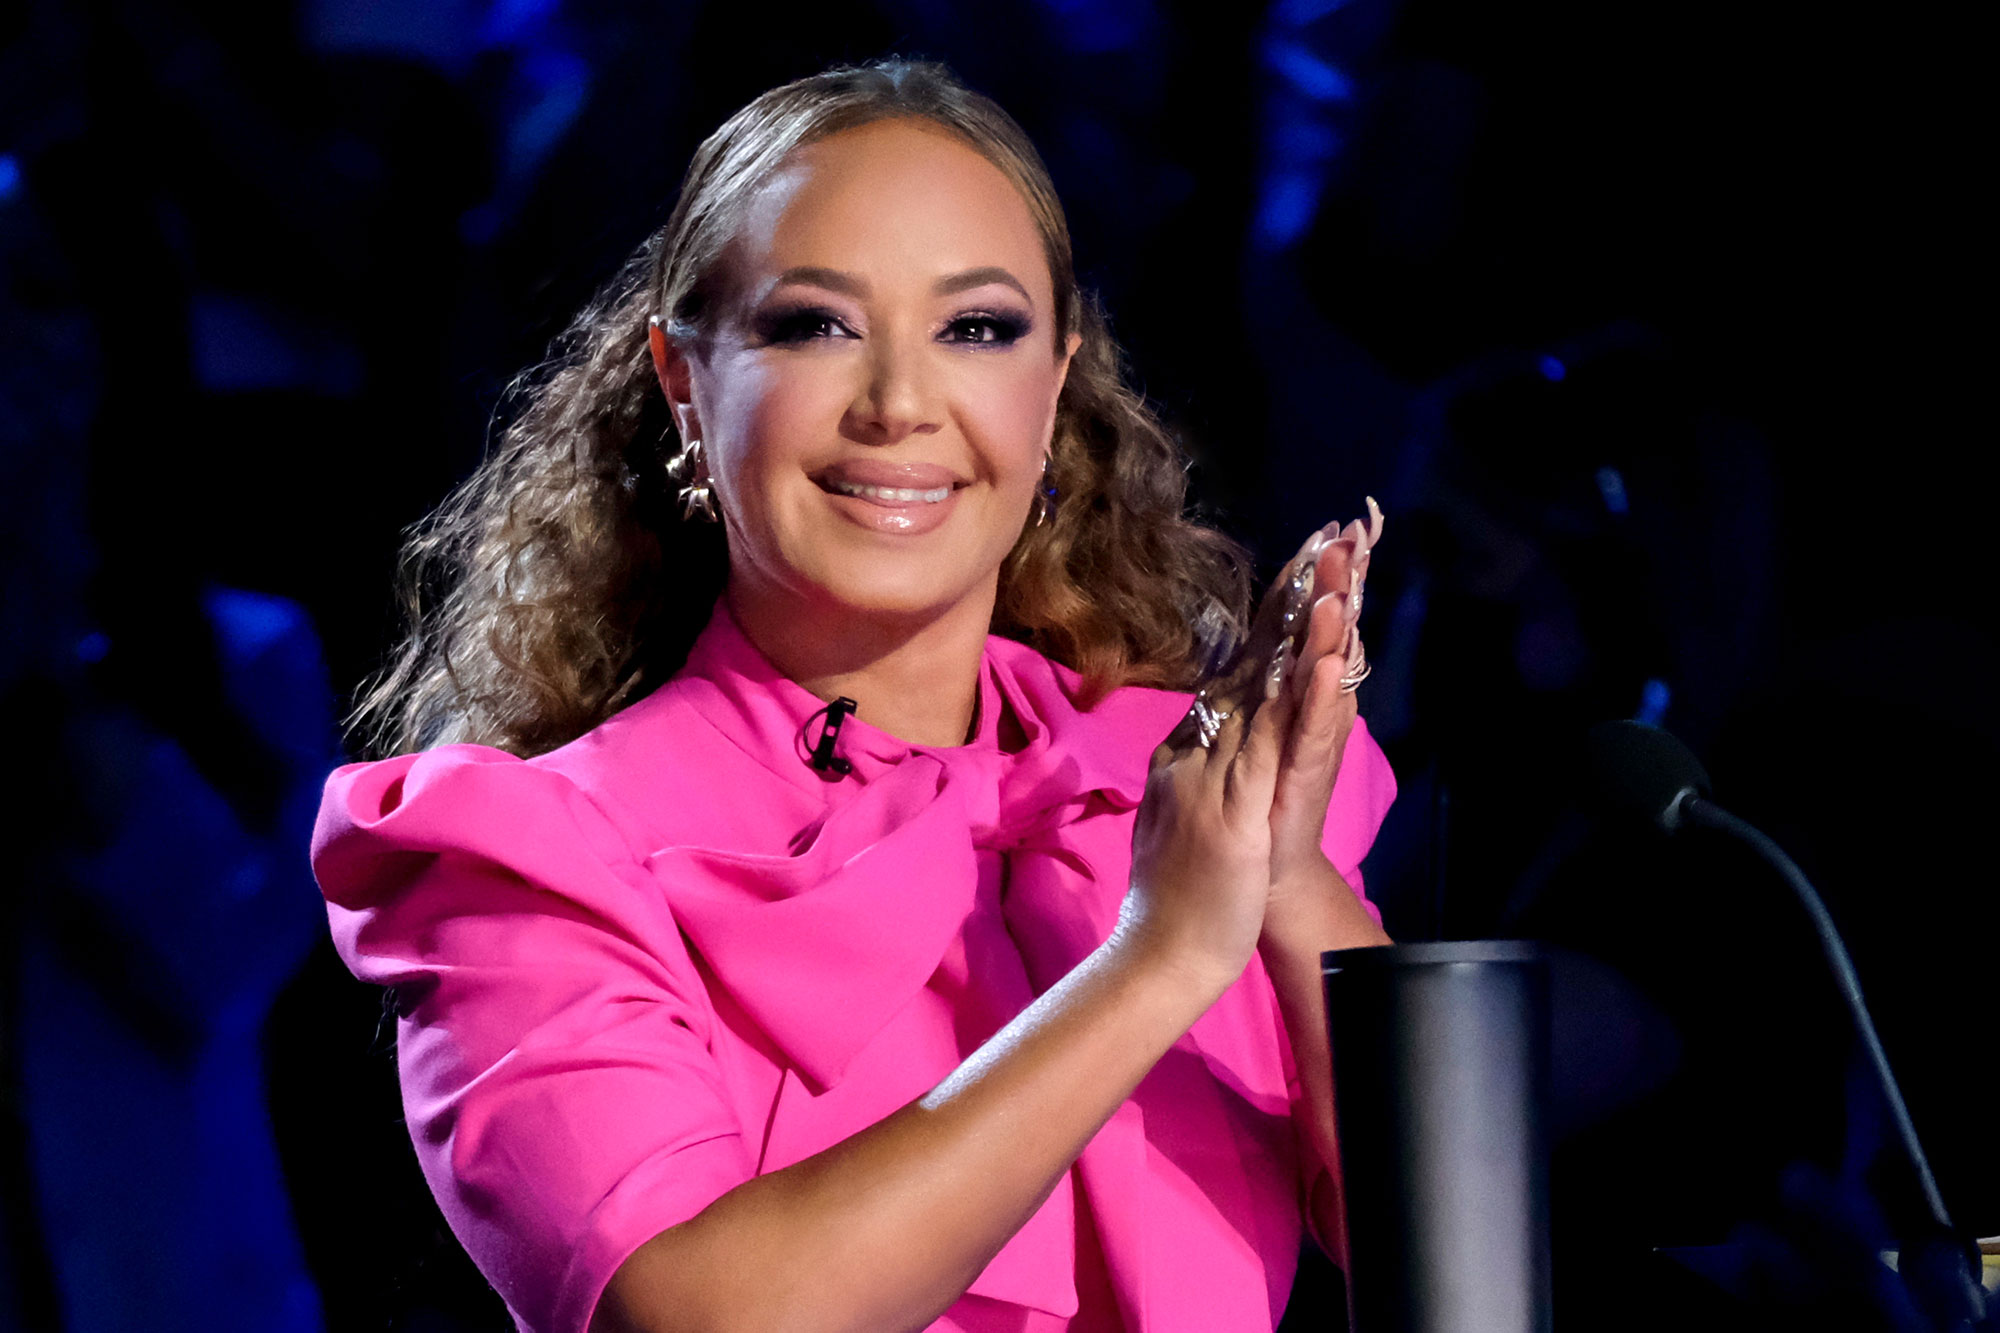 Leah Remini wearing a pink outfit while clapping